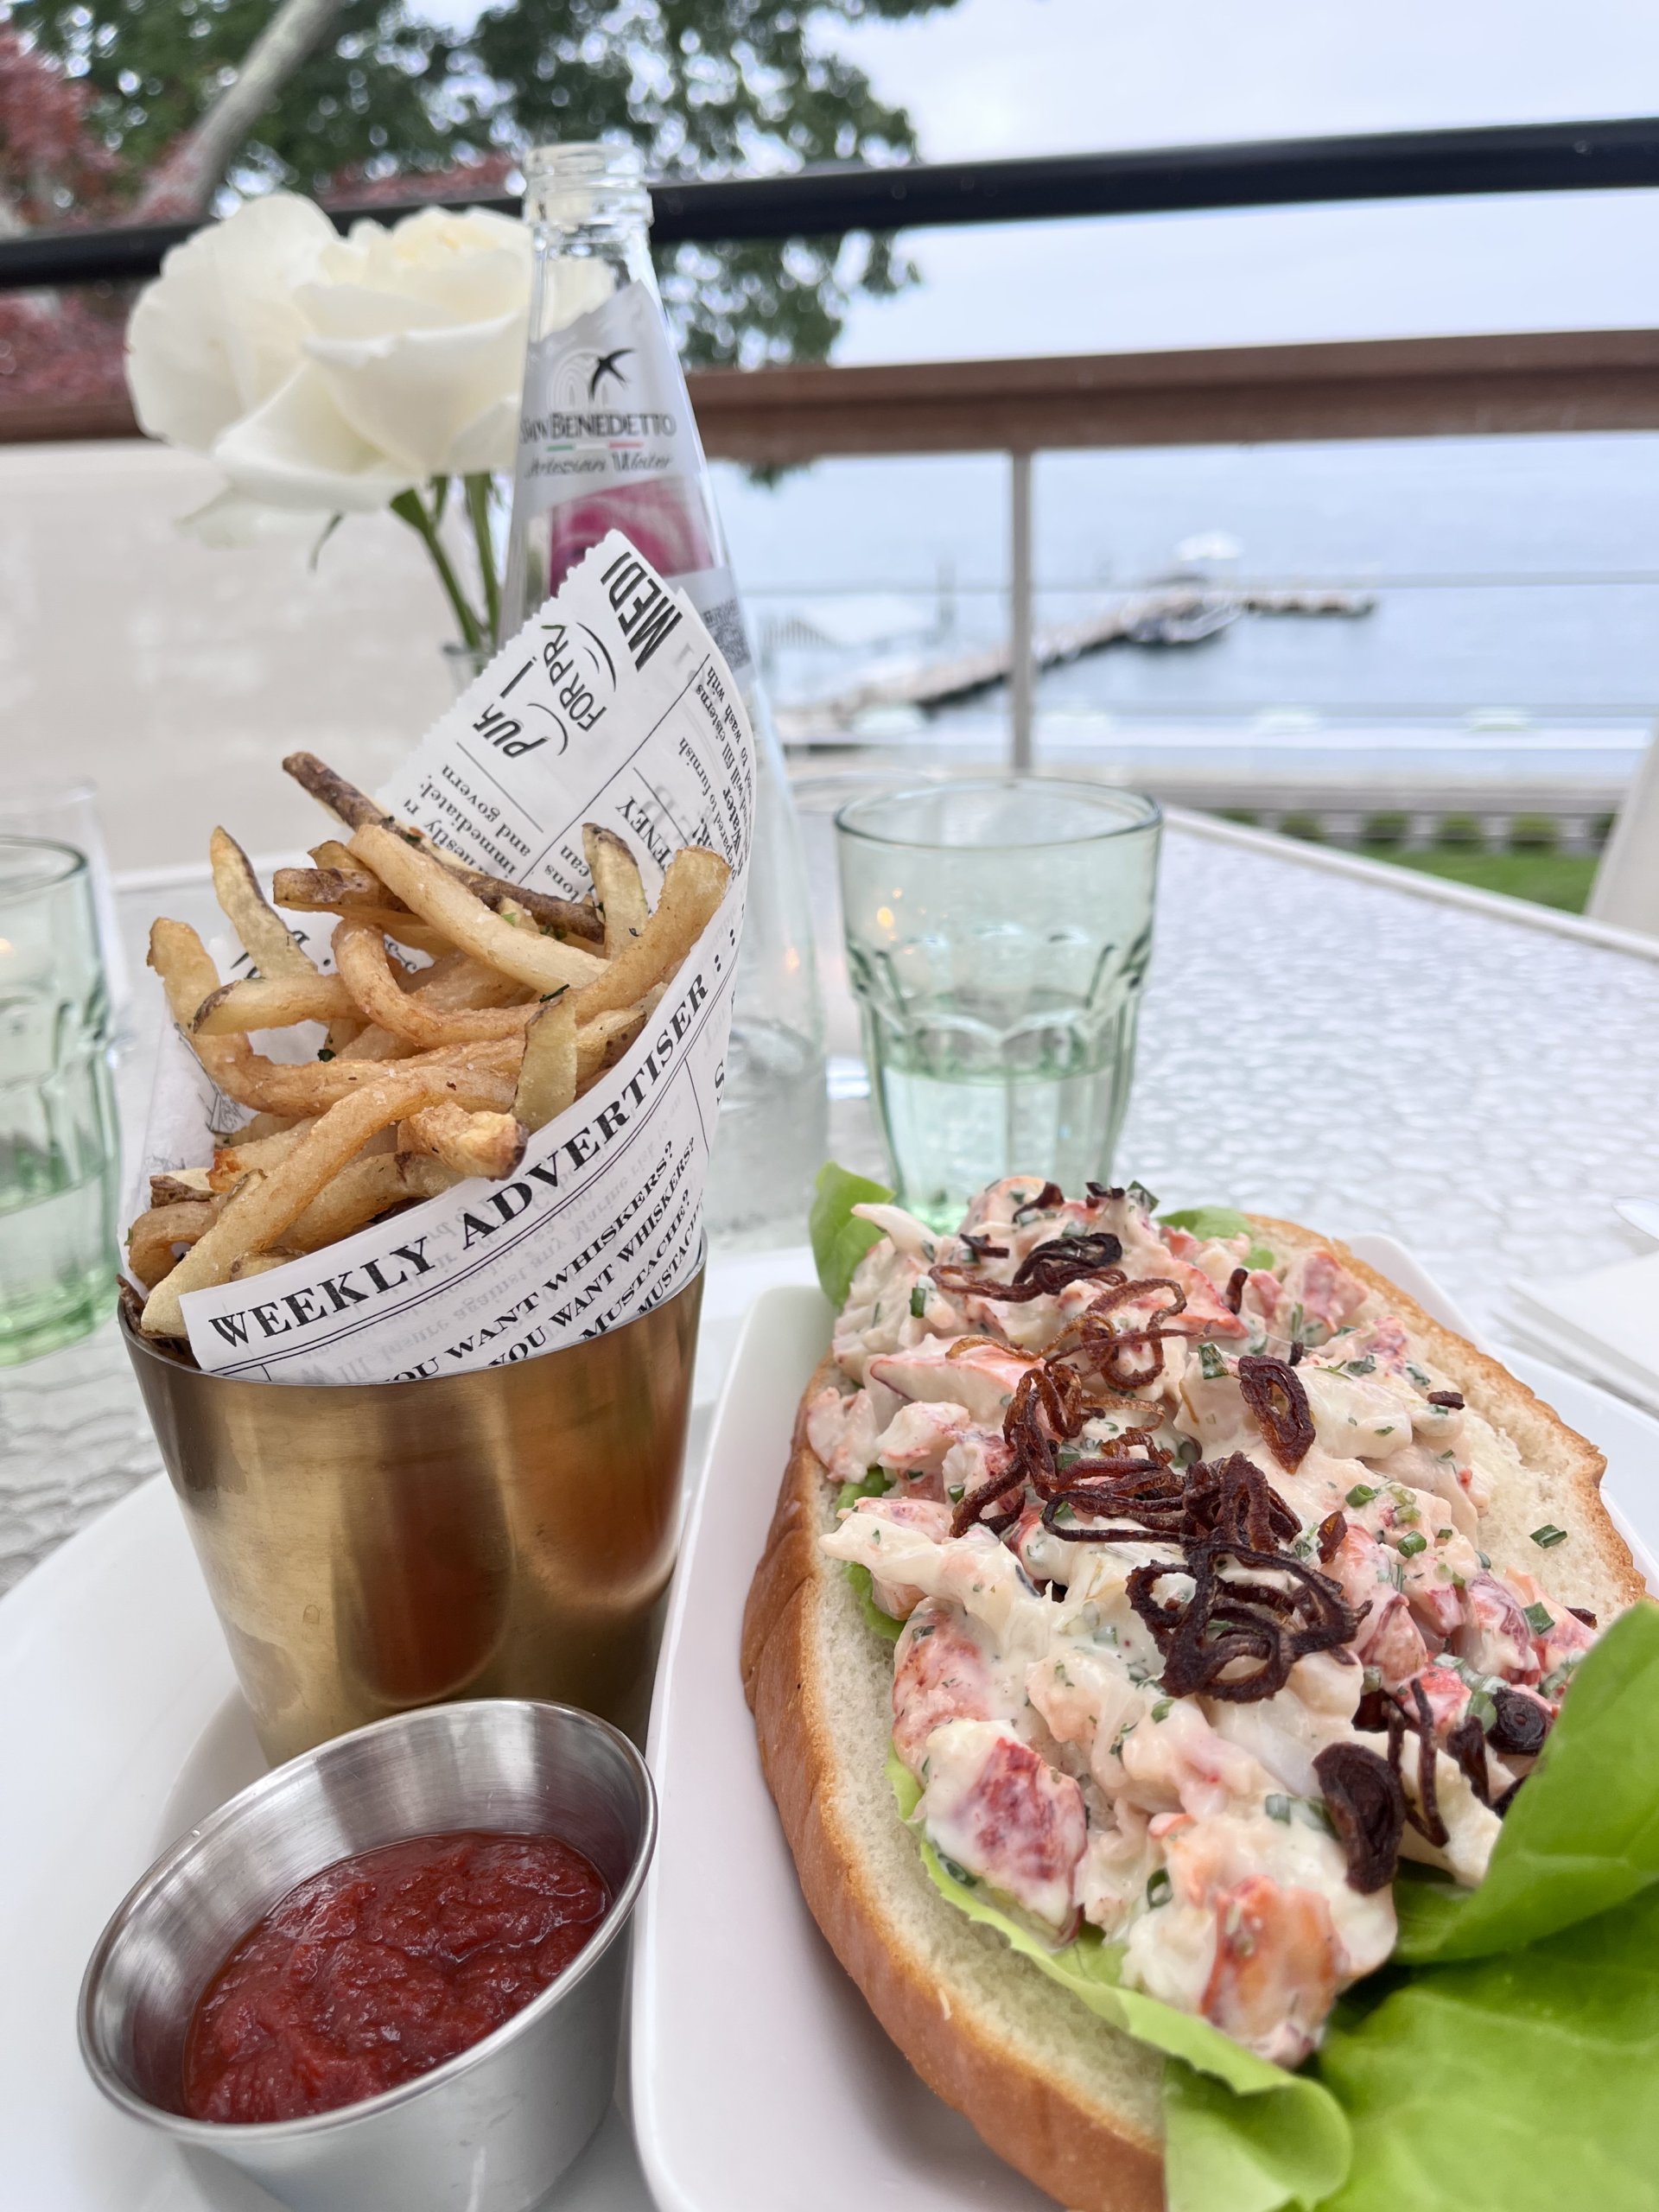 The Pridwin Lobster Roll